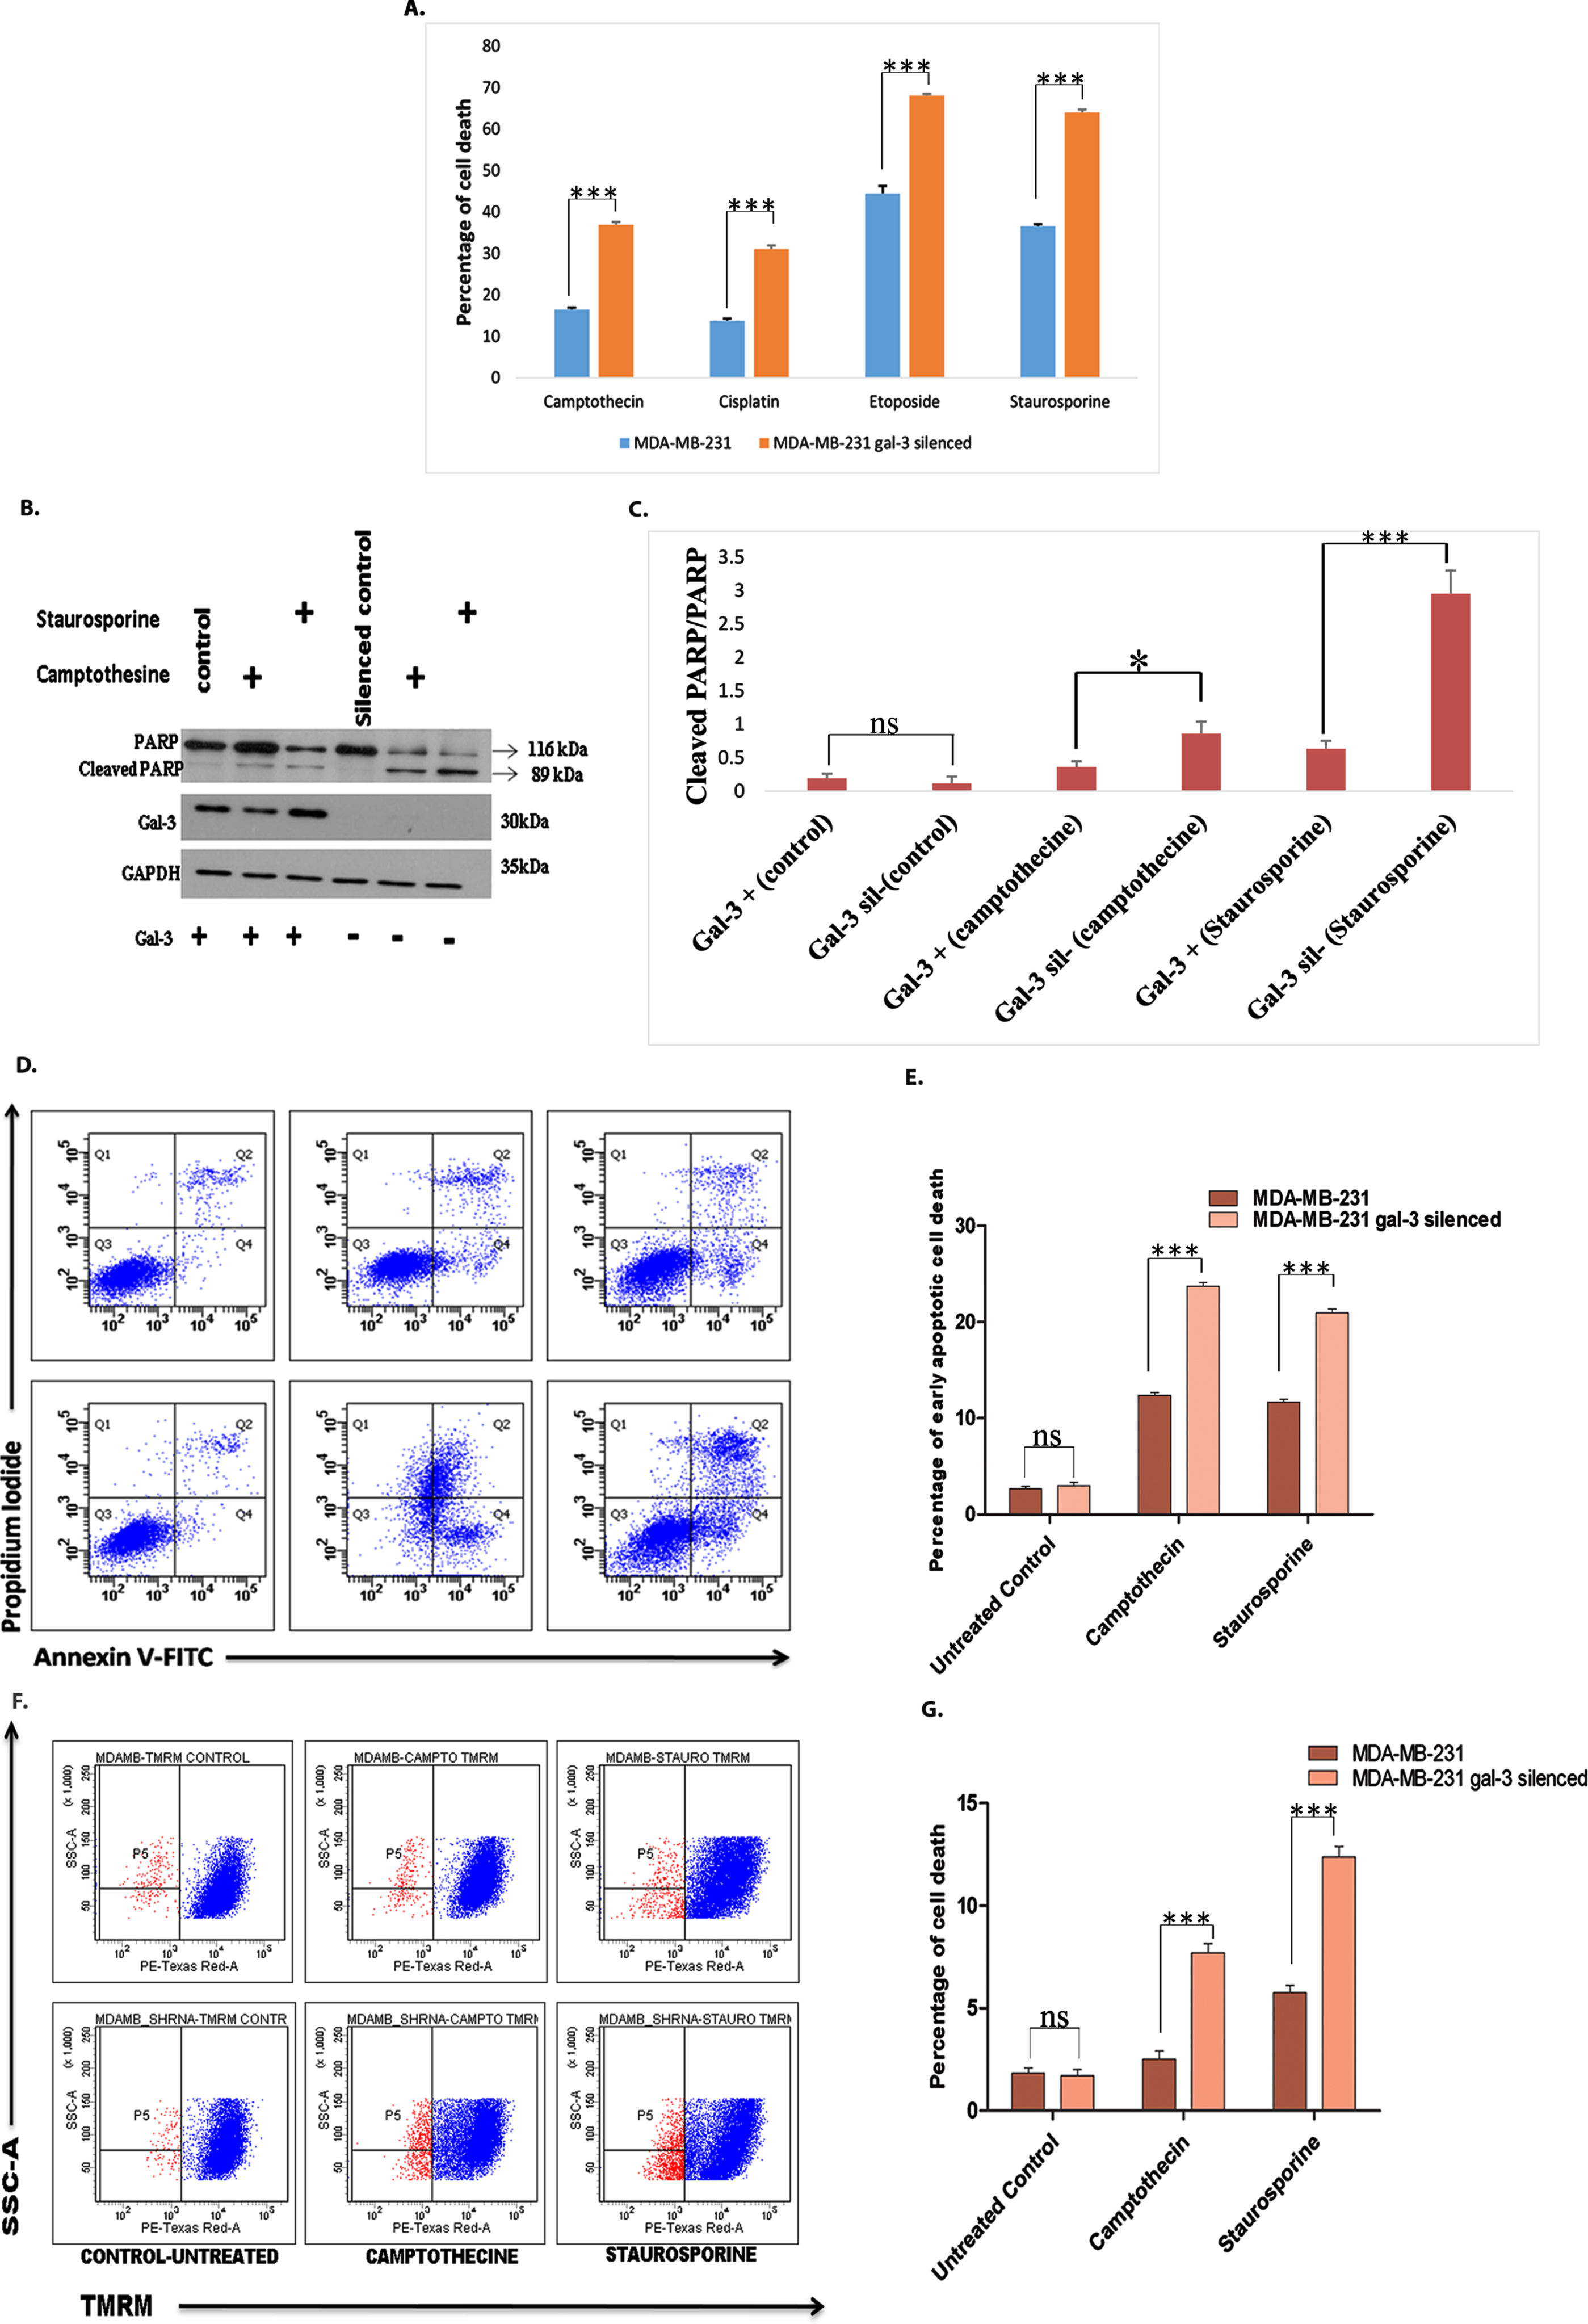 Silencing of galectin-3 in MDA-MB-231 cells sensitizes them towards drug treatment A. Cell death analysis using flow cytometry was carried out following treatment of both control and galectin-3-silenced cells MDA-MB-231 cells with different drugs namely camptothecine (25 μM), staurosporine (1 μM), cisplatin (50 μg/ml), and etoposide (50 μg/ml) for 24 hours. The cells were stained with Hoechst 33342 to determine the level of sub G1 cells. Drugs caused significant induction of apoptosis in galectin-3-silenced cells compared with control MDA-MB-231 cells. B and C. Activation of Caspase-3 leading to apoptosis-specific cleavage of PARP after treating with camptothecine and staurosporine was significantly detected through western blot analysis in galectin-3-silenced MDA-MB-231 cells and its quantification. D. Detection of the externalization of phosphatidylserine in apoptotic cells using annexin V conjugated to green-fluorescent FITC dye and dead cells using propidium iodide. E. Quantification of Annexin V/PI assay. F. After treatment with drugs like camptothecine and staurosporine, cells were stained using TMRM and subjected to FACS analysis for identification of disruption of mitochondrial membrane potential. TMRM that localizes in mitochondria detects mitochondrial membrane depolarization. G. Quantification of TMRM staining. Data represented in (A, C, E and G) are mean±SD (n = 3) calculated using GraphPad Prism 5.01. The criteria for significance were p < 0.05 (*), p < 0.01 (**), and p < 0.001 (***) and ns means no statistical significance.